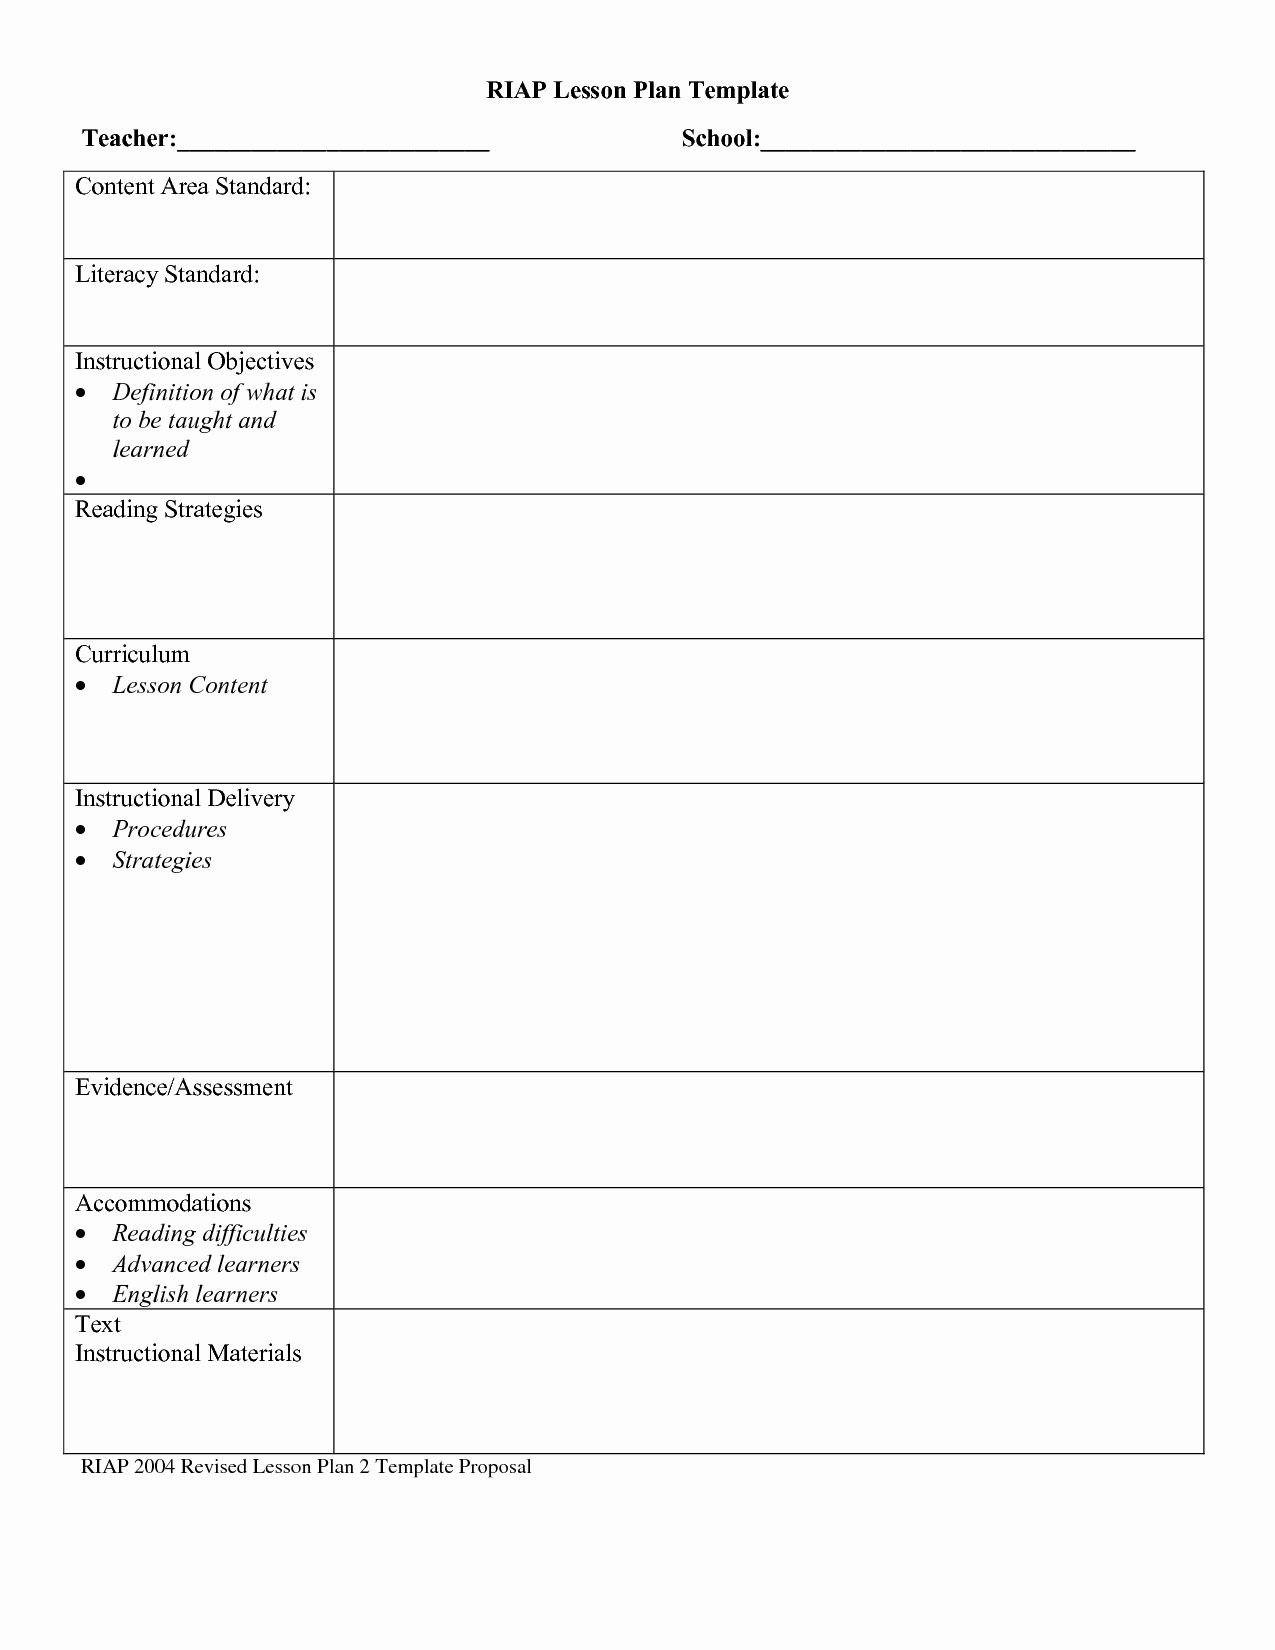 Elementary School Lesson Plans Template Beautiful Free Lesson Plan Templates for Middle School